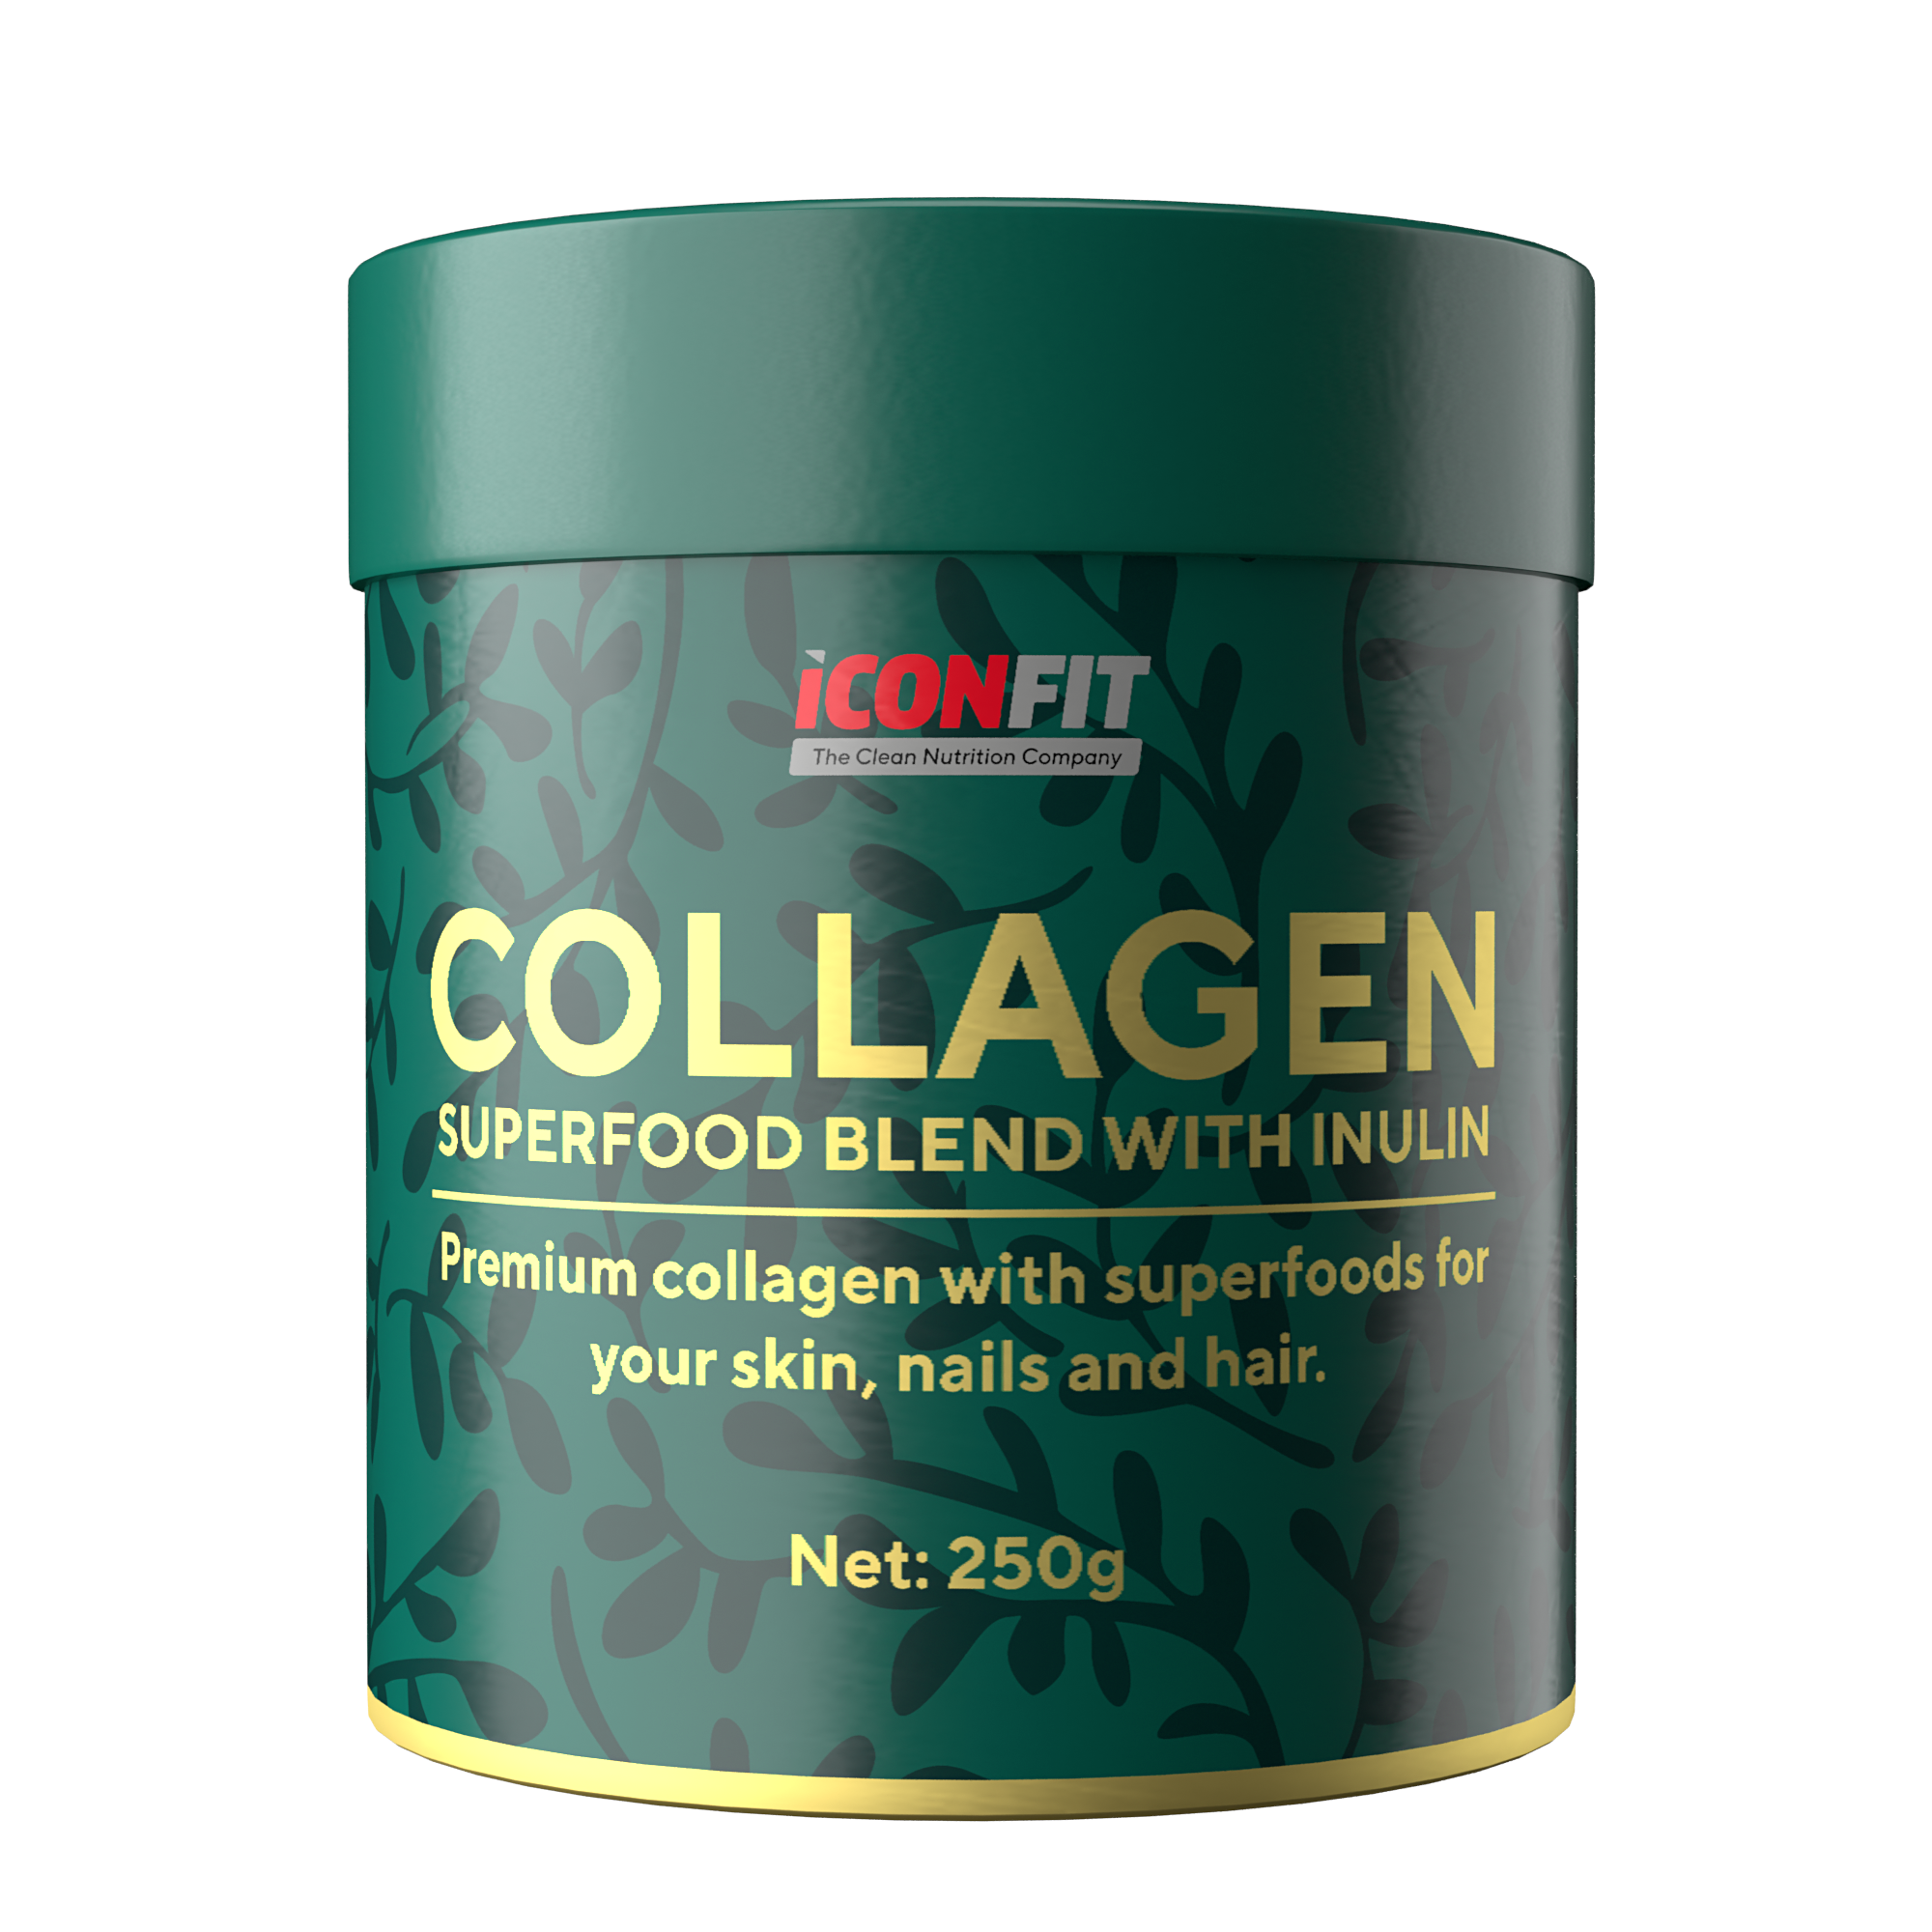 ICONFIT-Collagen-Superfoods-Inulin-Raspberry-Blackcurrant-250g